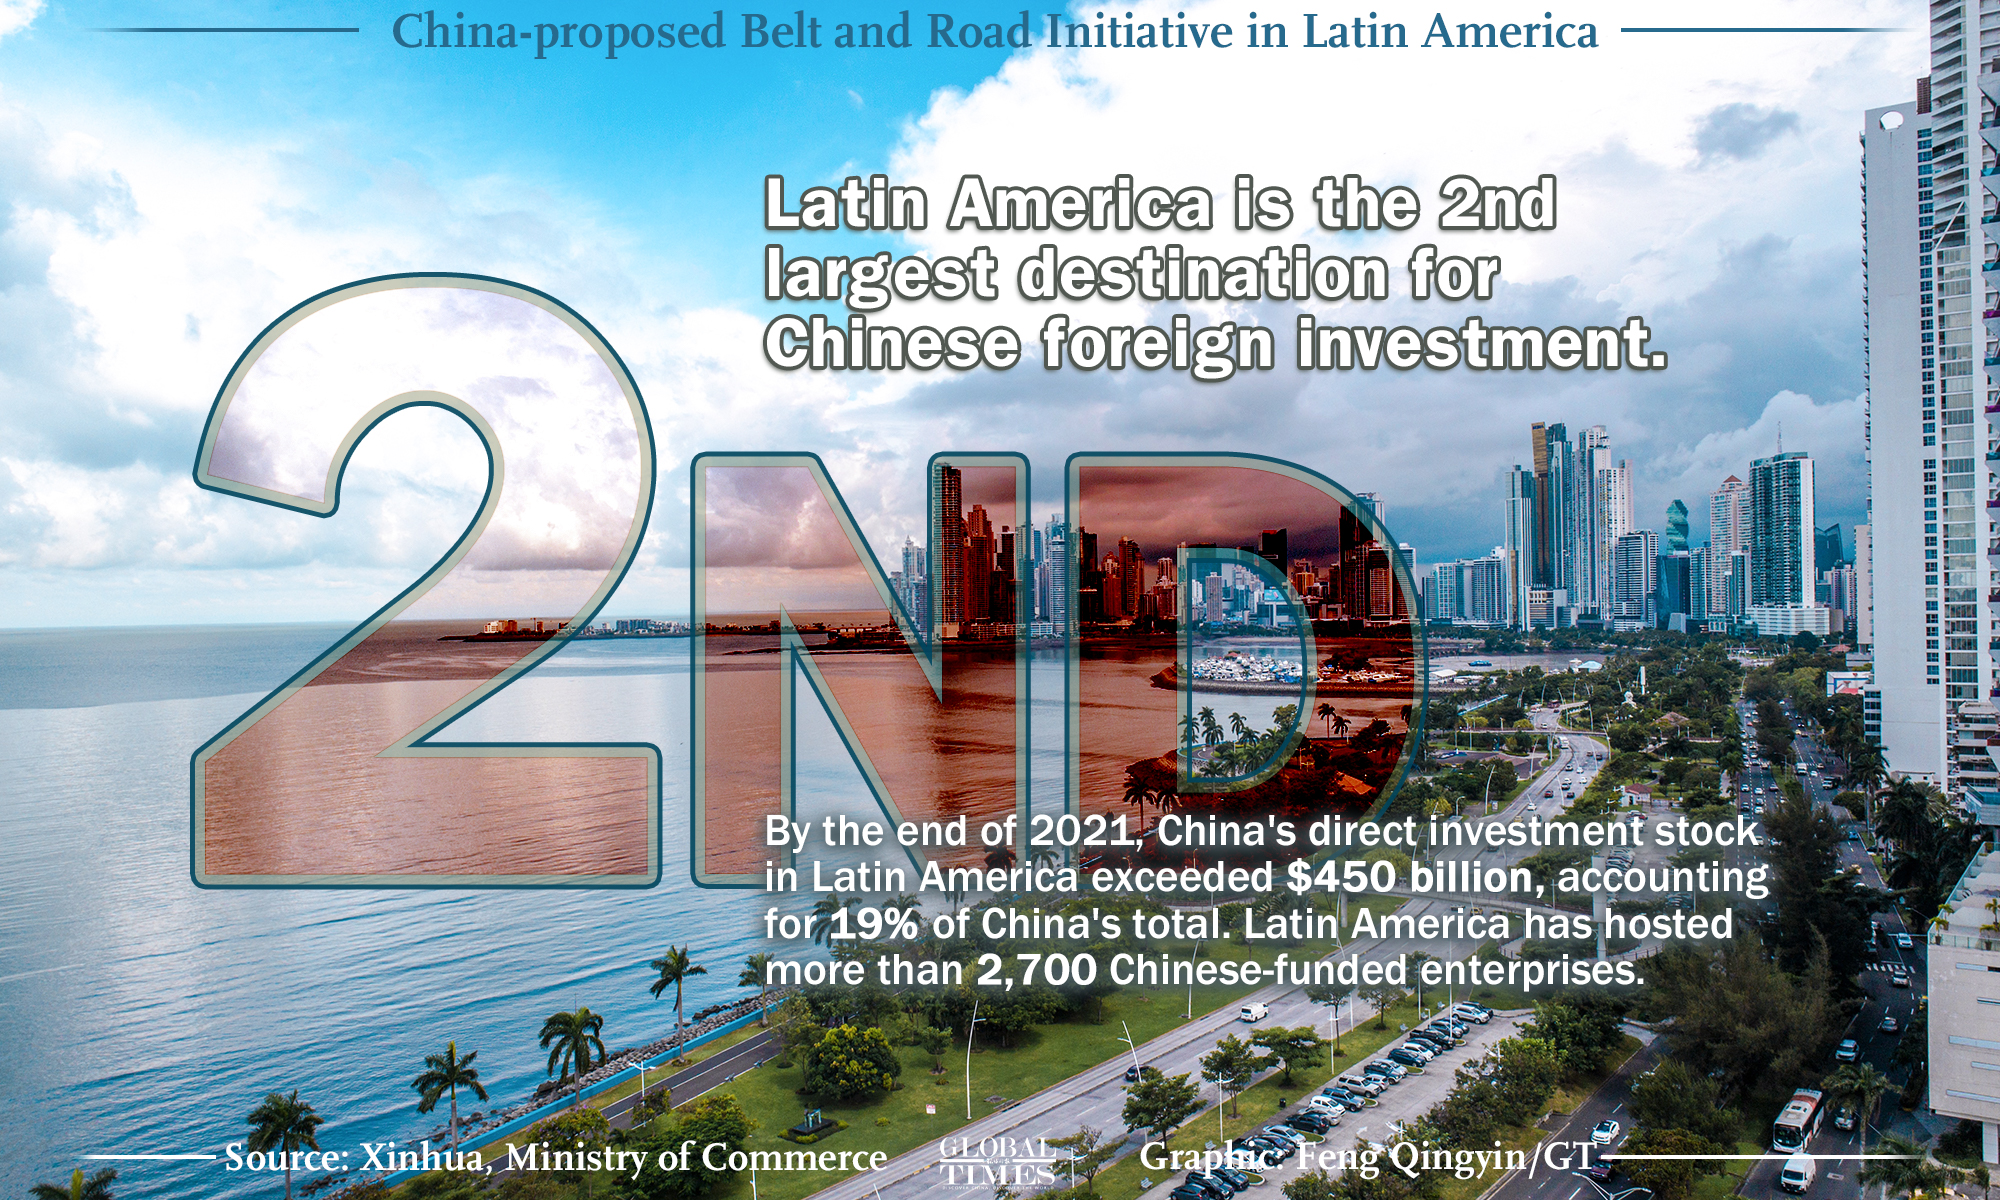 China-proposed Belt and Road Initiative in Latin America Graphic: Feng Qingyin/GT